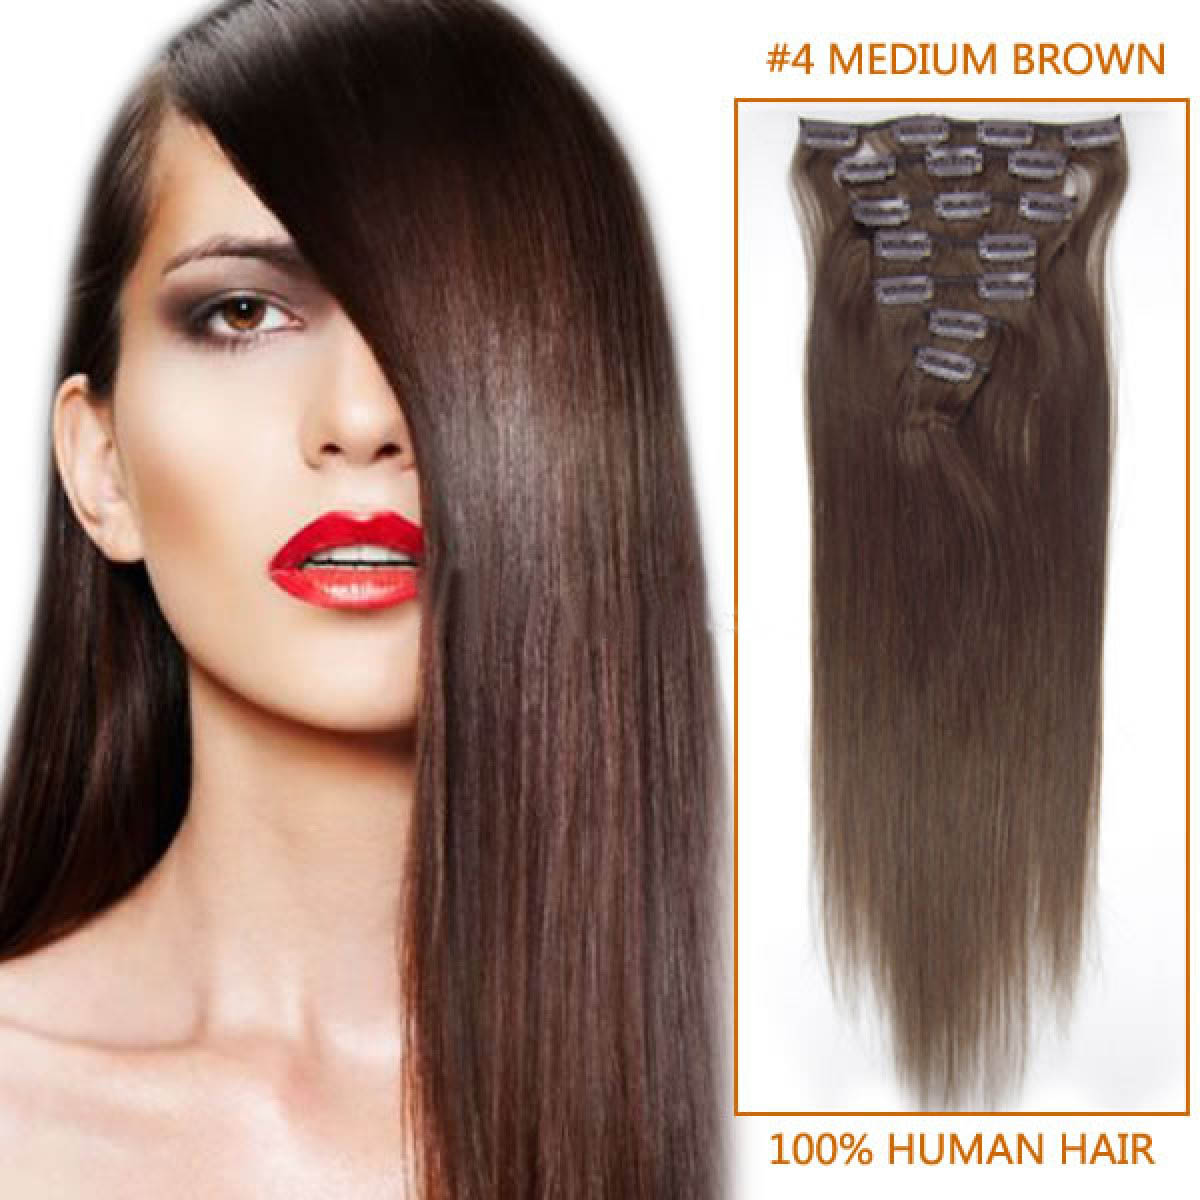 24 Inch 4 Medium Brown Clip In Remy Human Hair Extensions 7pcs